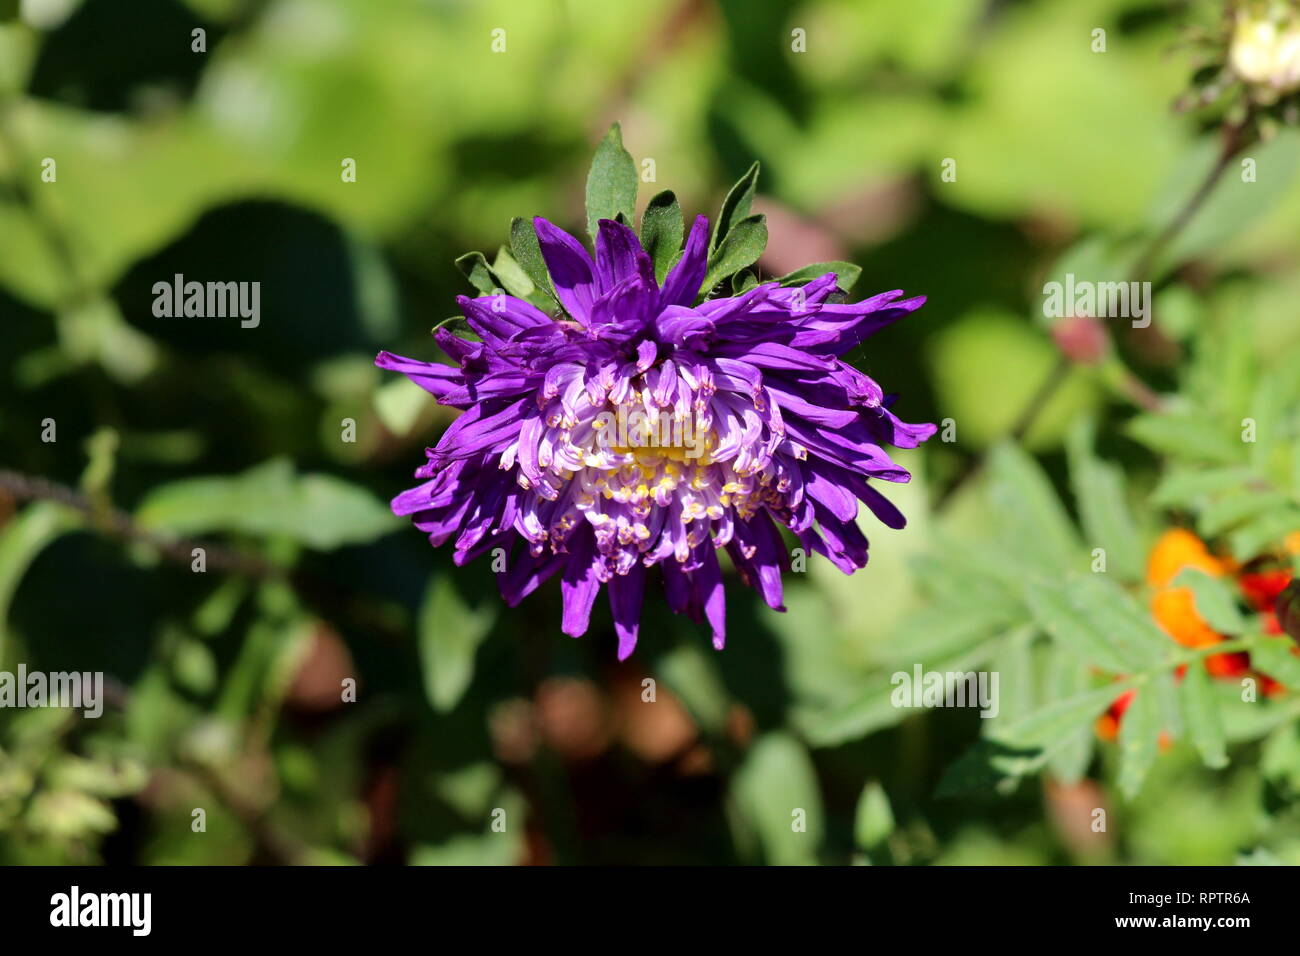 China aster or Callistephus chinensis or Annual aster monotypic genus of flowering plant planted in local garden with dense violet flower Stock Photo